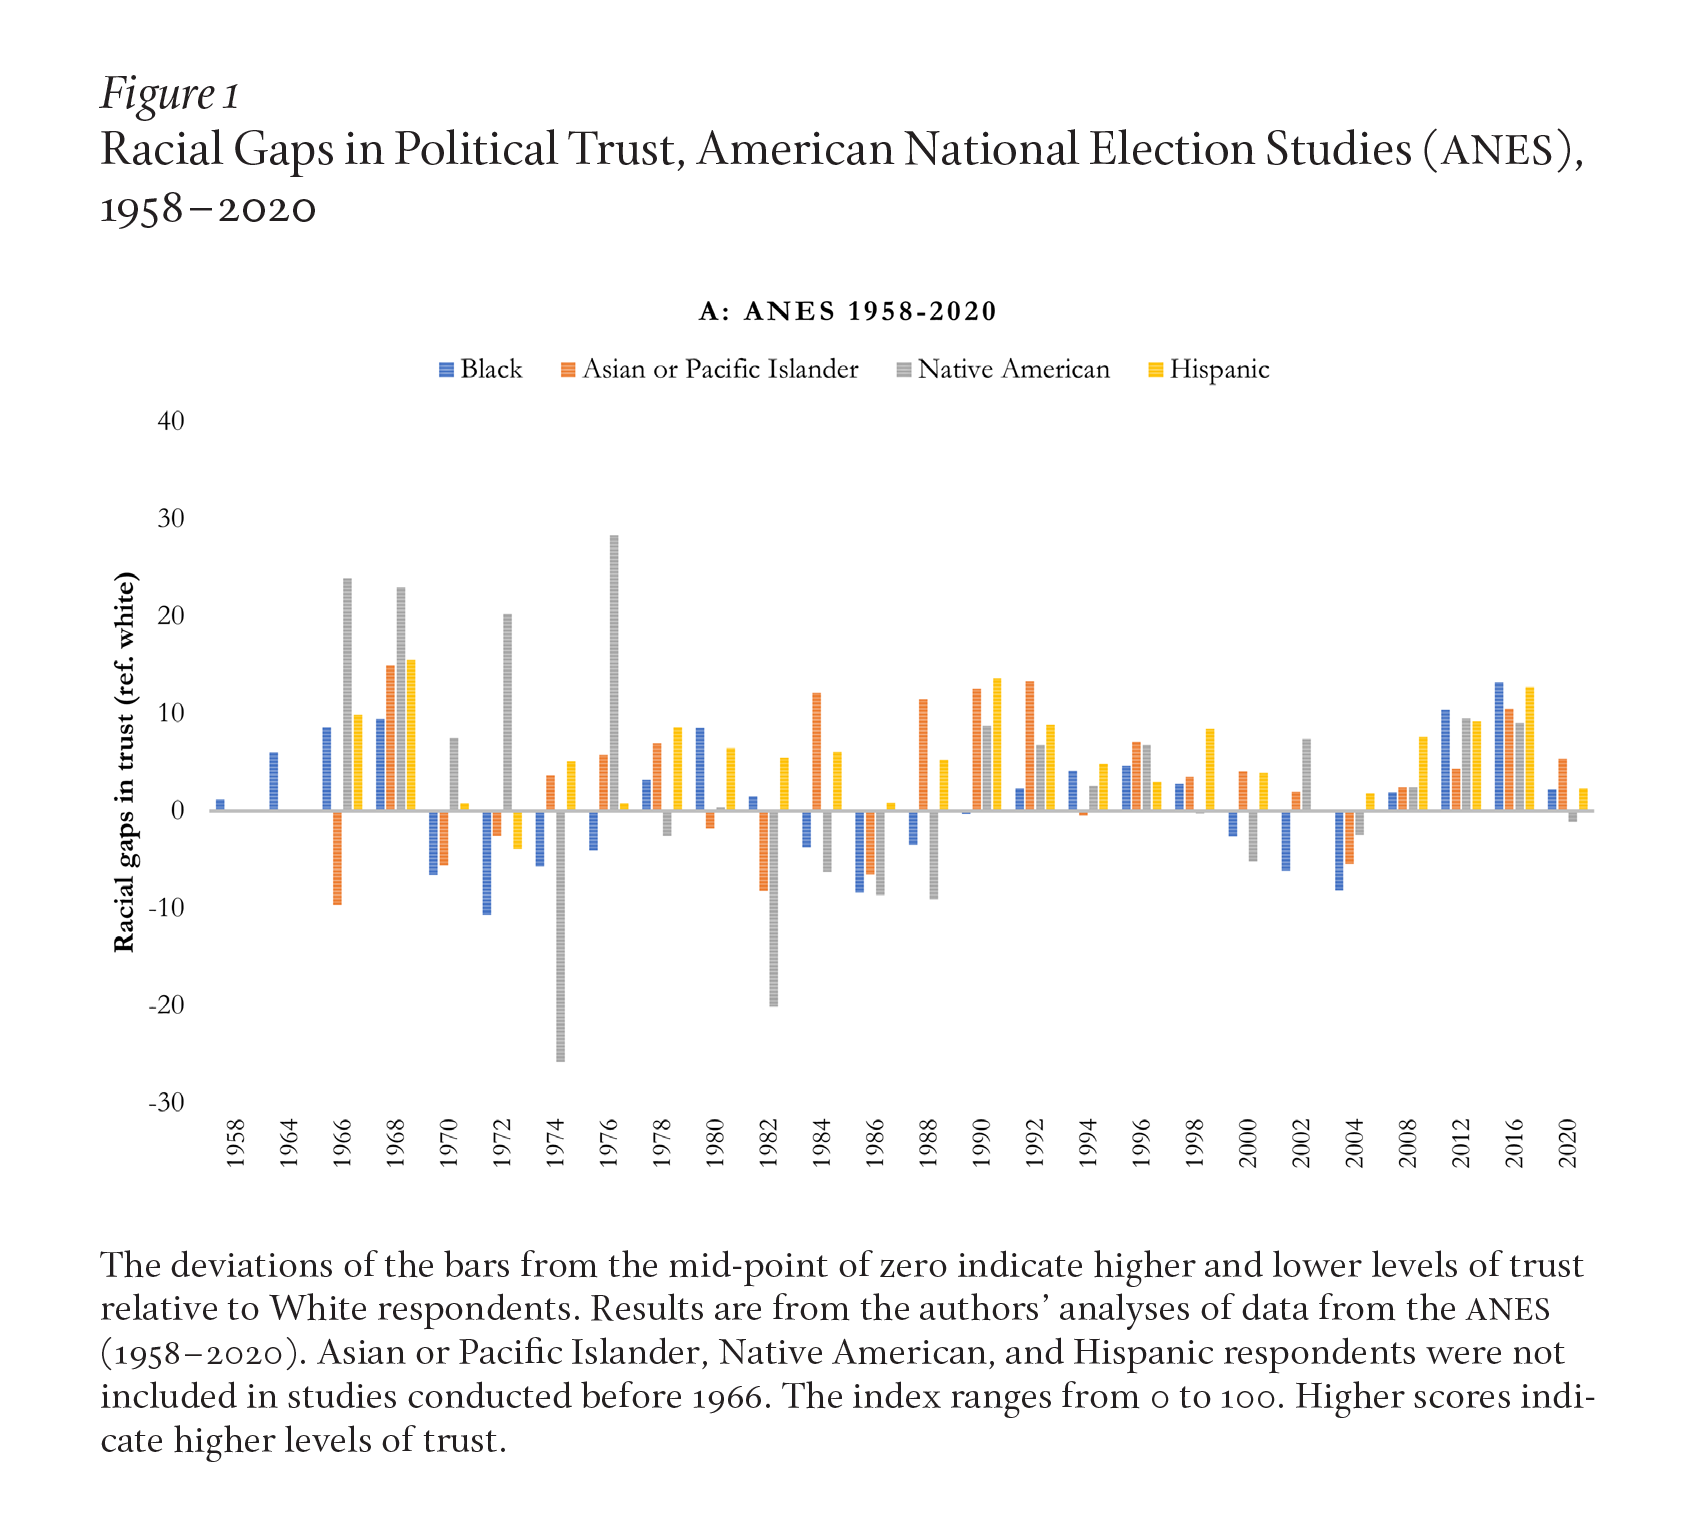 Figure 1 shows racial gaps in political trust among Asians or Pacific Islanders, Blacks, Hispanics, and Native Americans, with Whites as a reference. The figure shows that the gap in trust between racial and ethnic minorities and Whites has varied over time, not only in size but also in direction. For example, a pattern emerges wherein Black and White Americans switch positions repeatedly. 